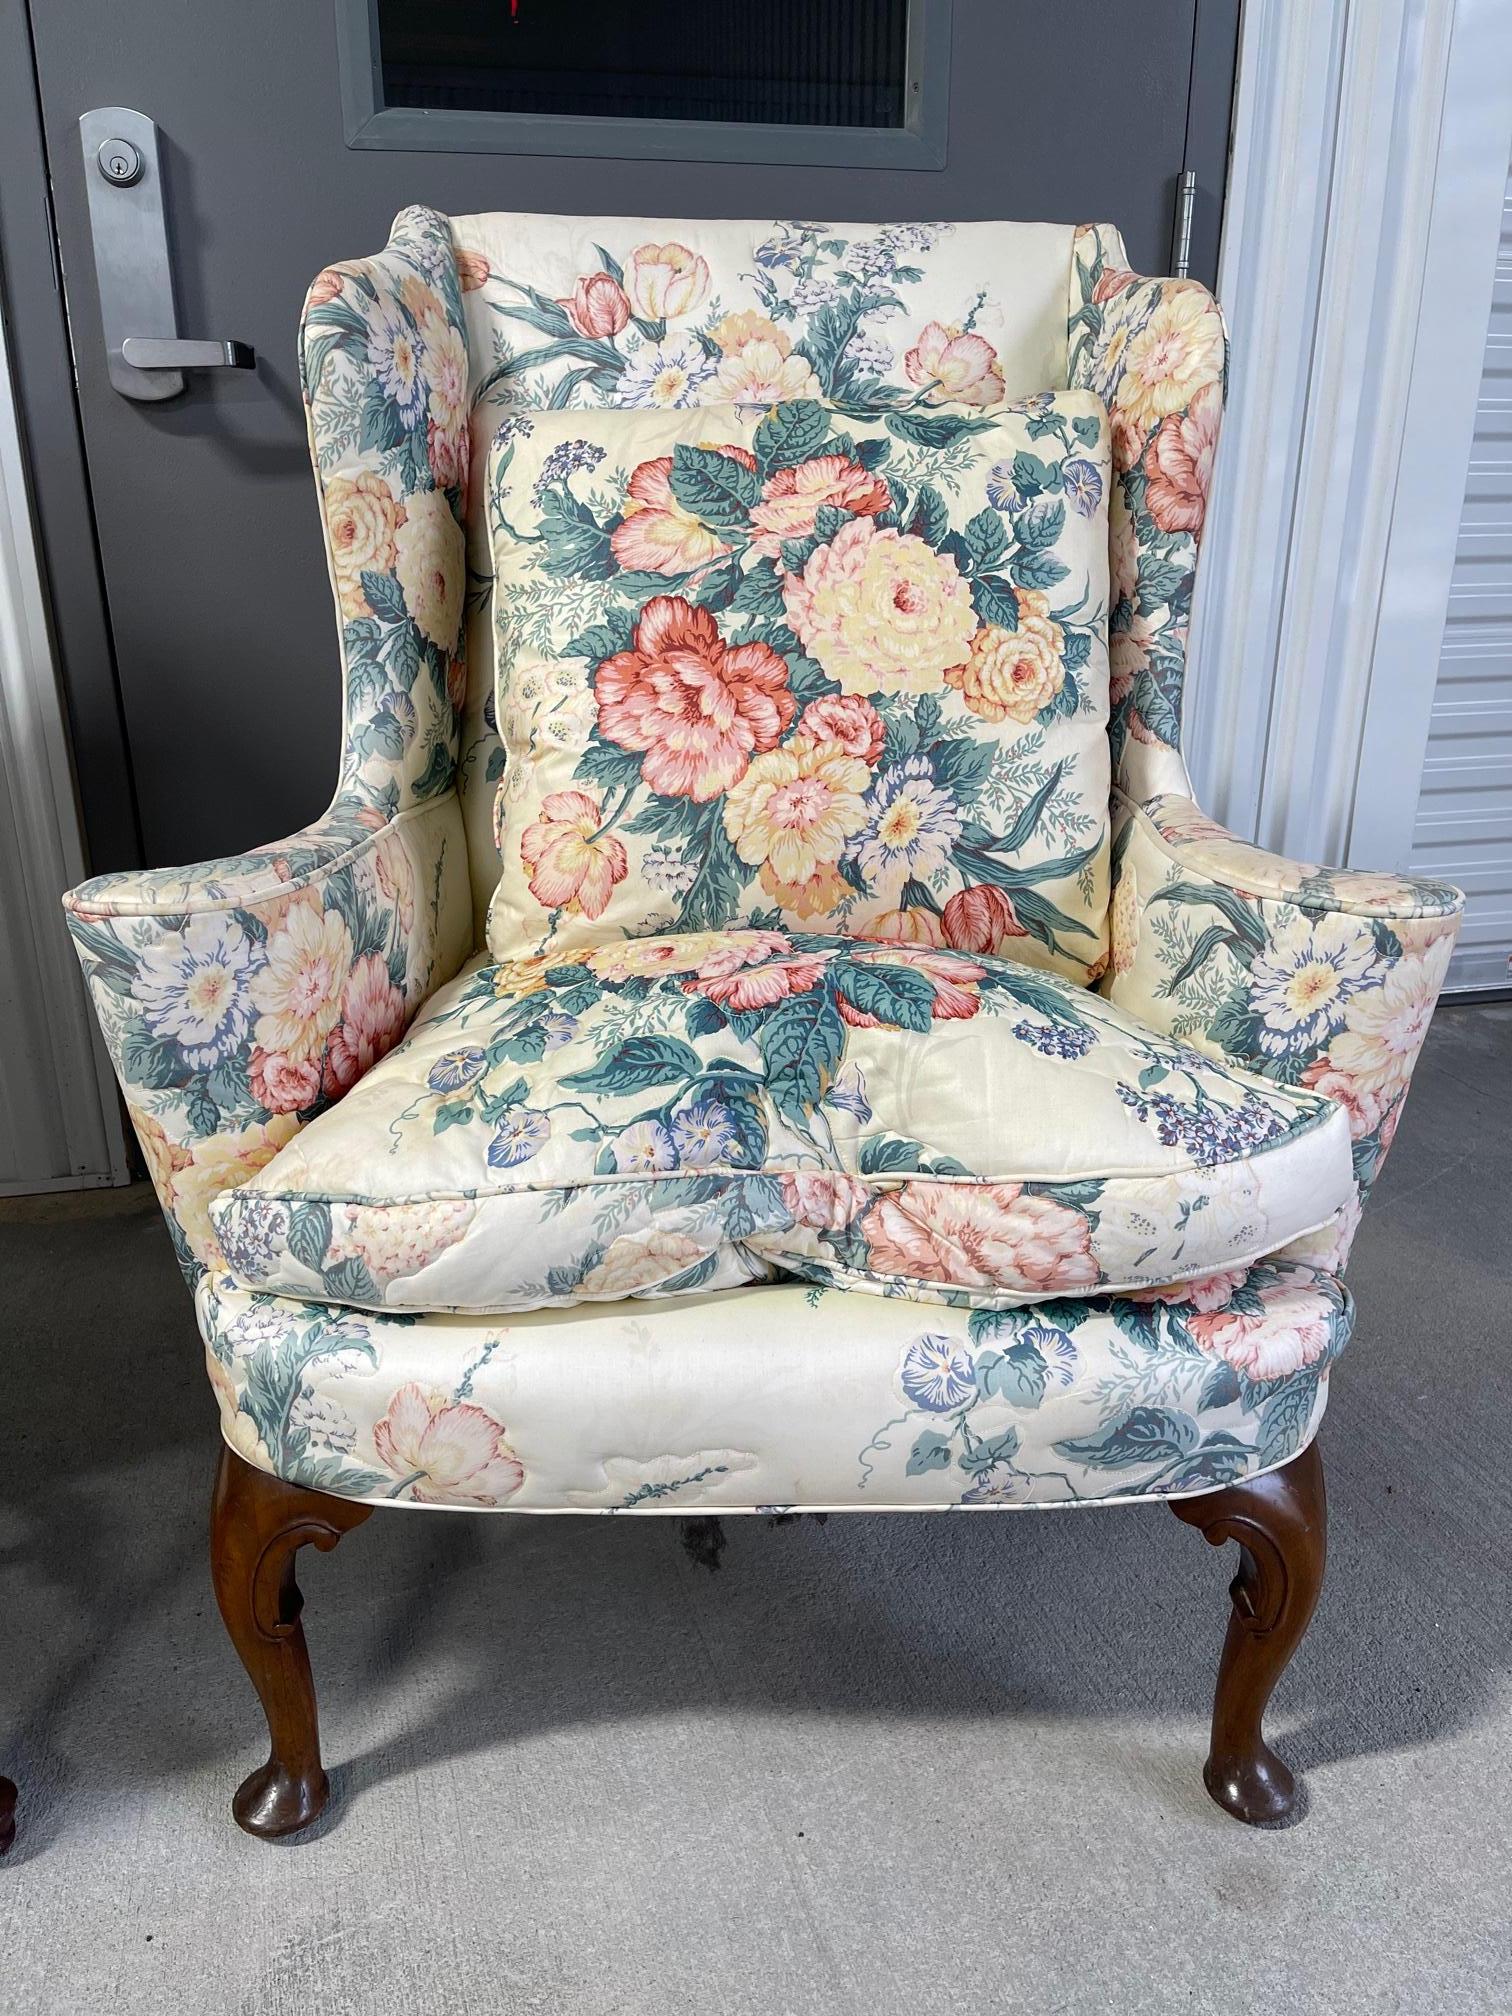 Upholstered Queen Anne Style Wingback Chair with Pad Feet, 20th Century In Good Condition For Sale In Savannah, GA